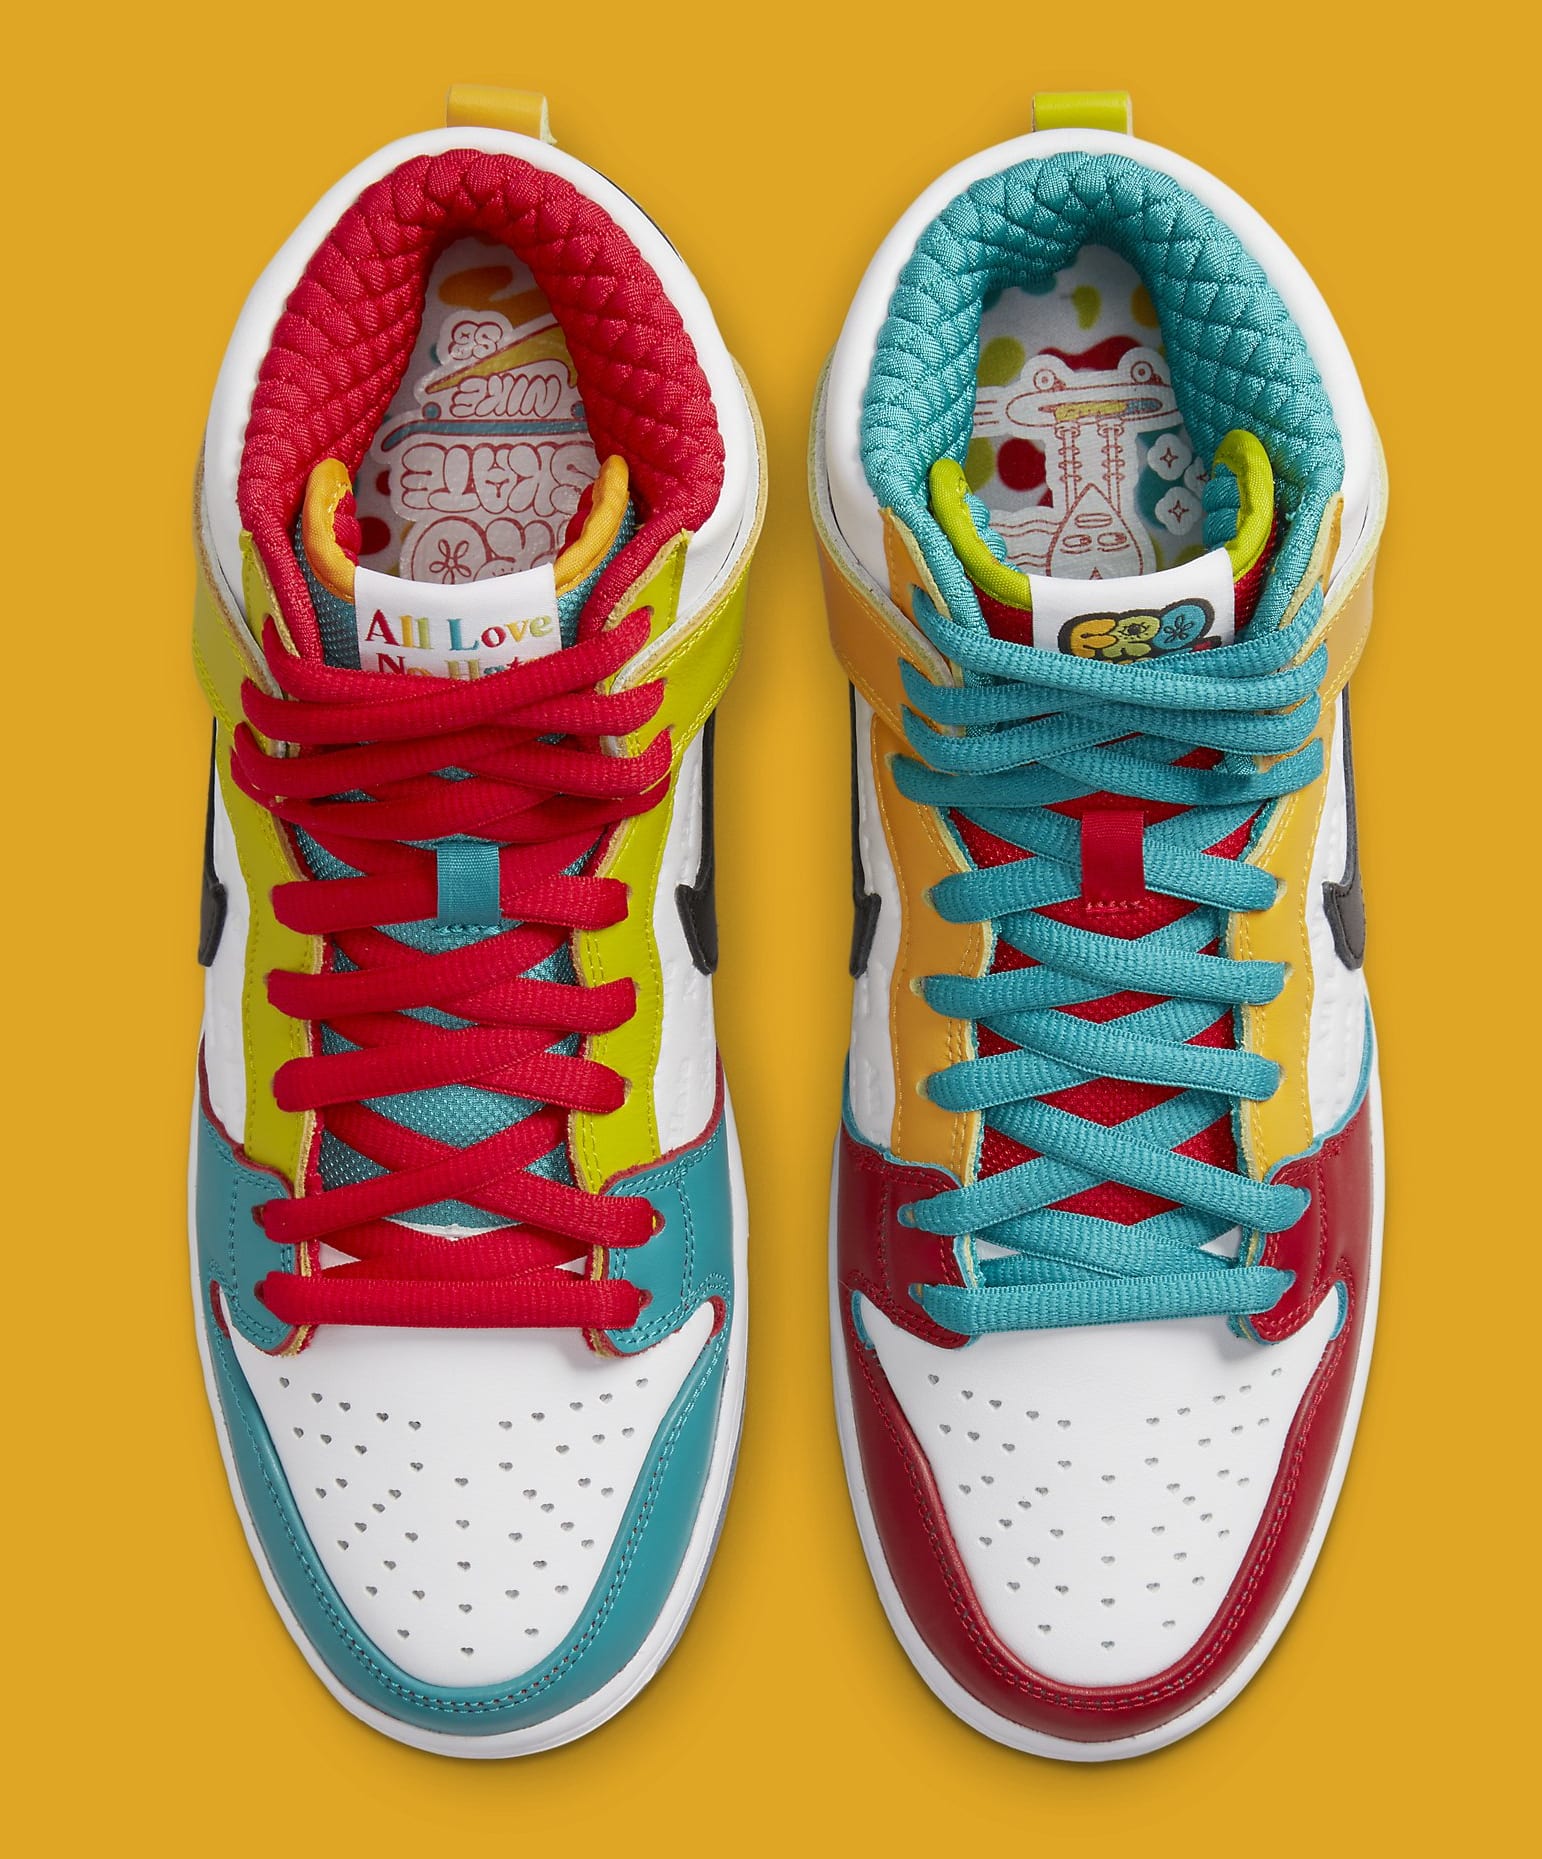 FroSkate x Nike SB Dunk High Collab Release Date 2022 DH7778 100 